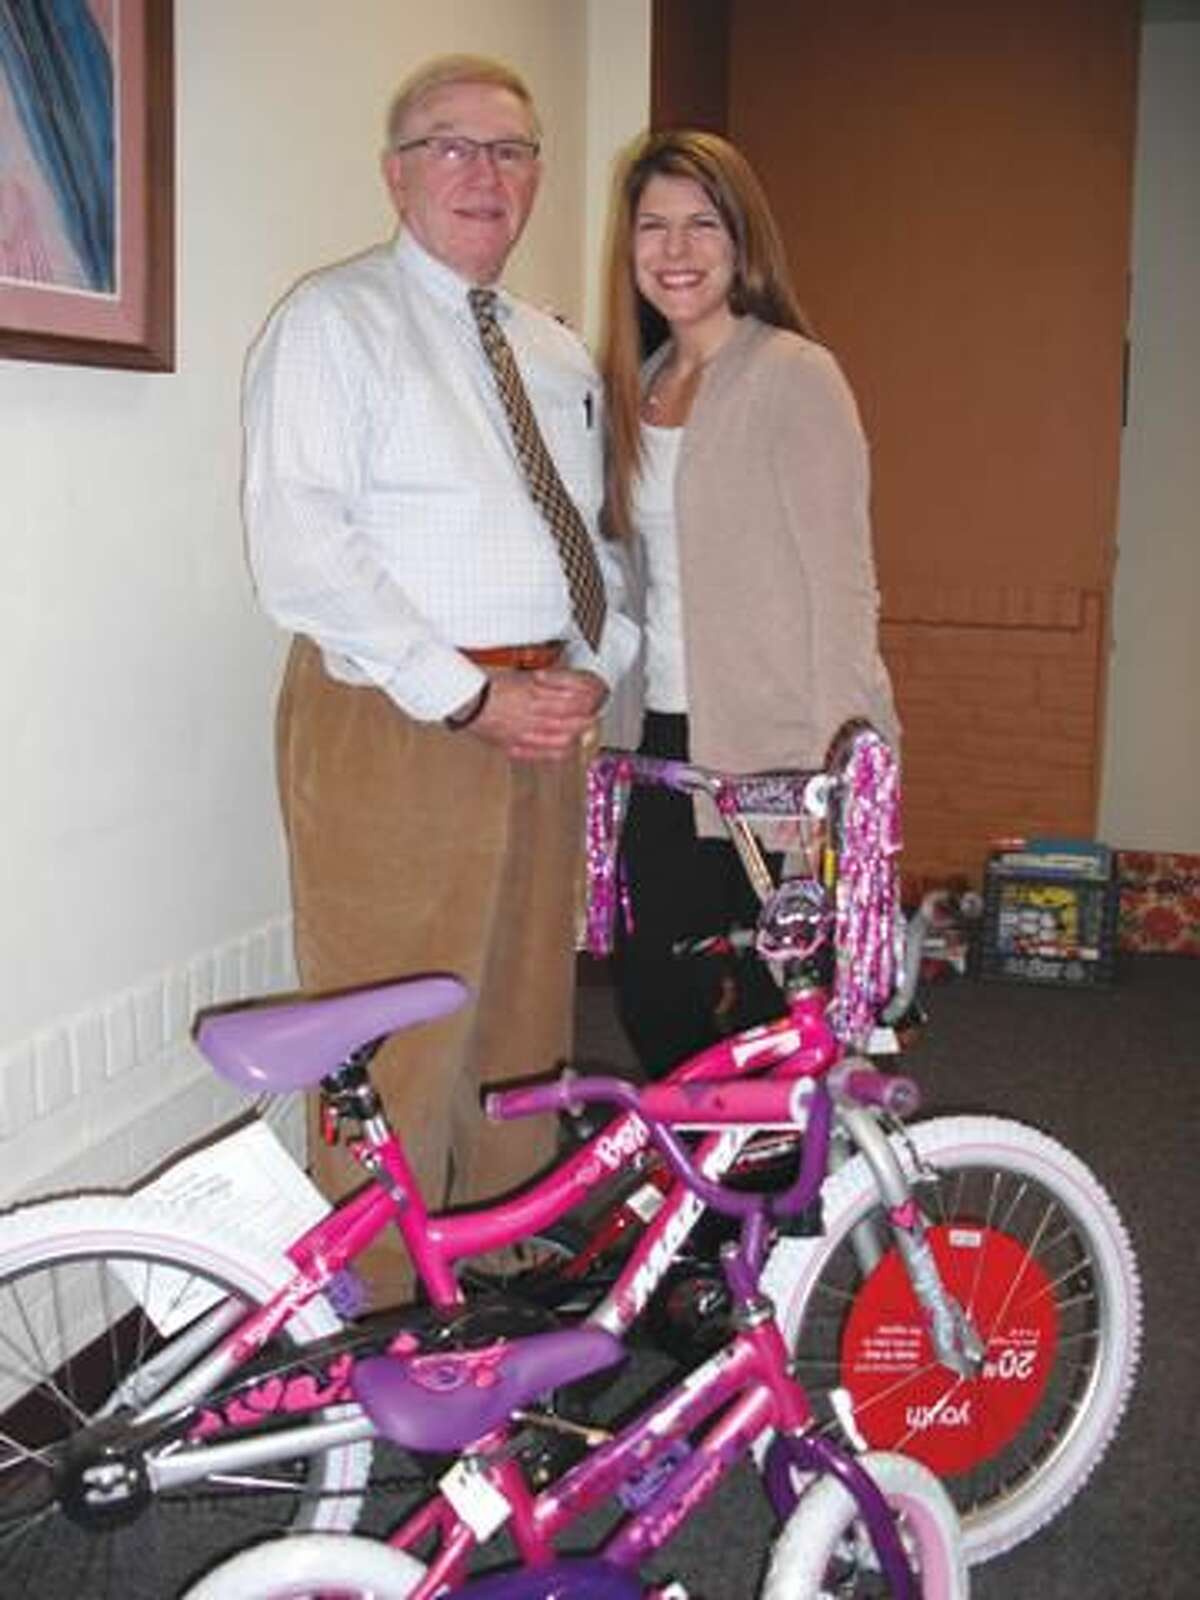 Submitted Photo Pictured are Danny Perrotto (Bikes for Babes) and Carla Riccio (Community Services).